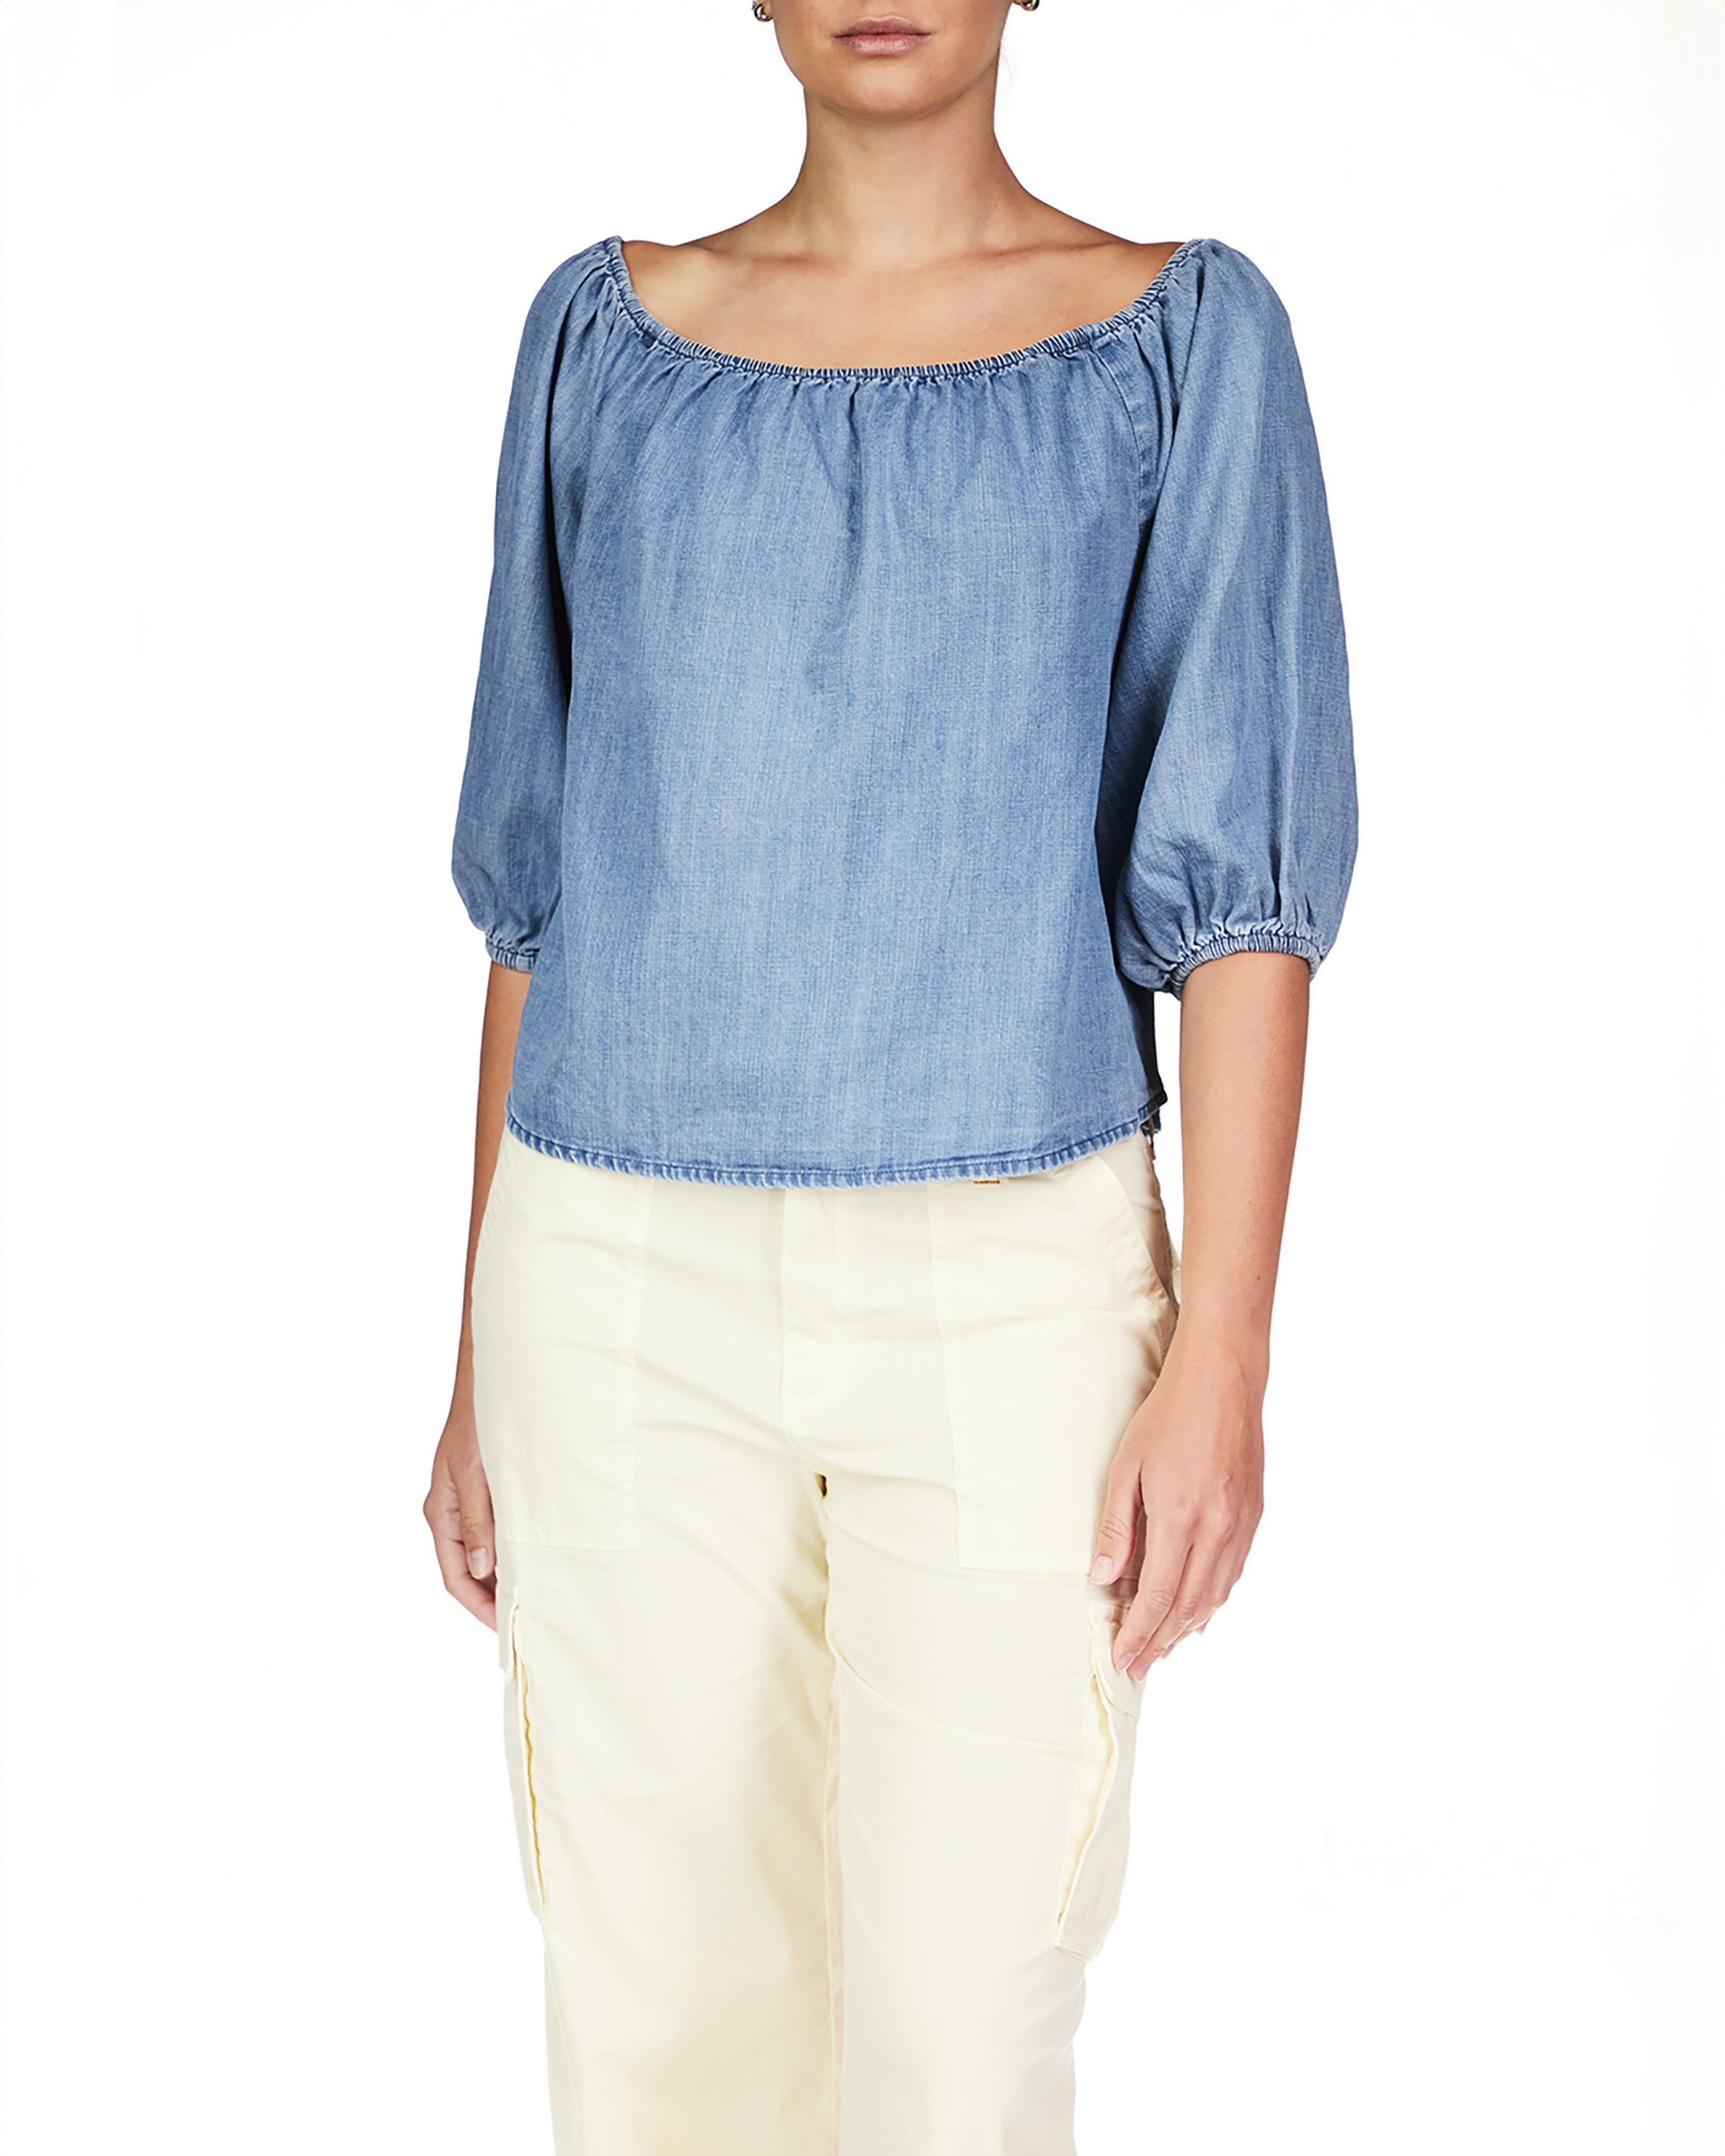 Sanctuary Beach to Bar Blouse in Bit of Blue Wash